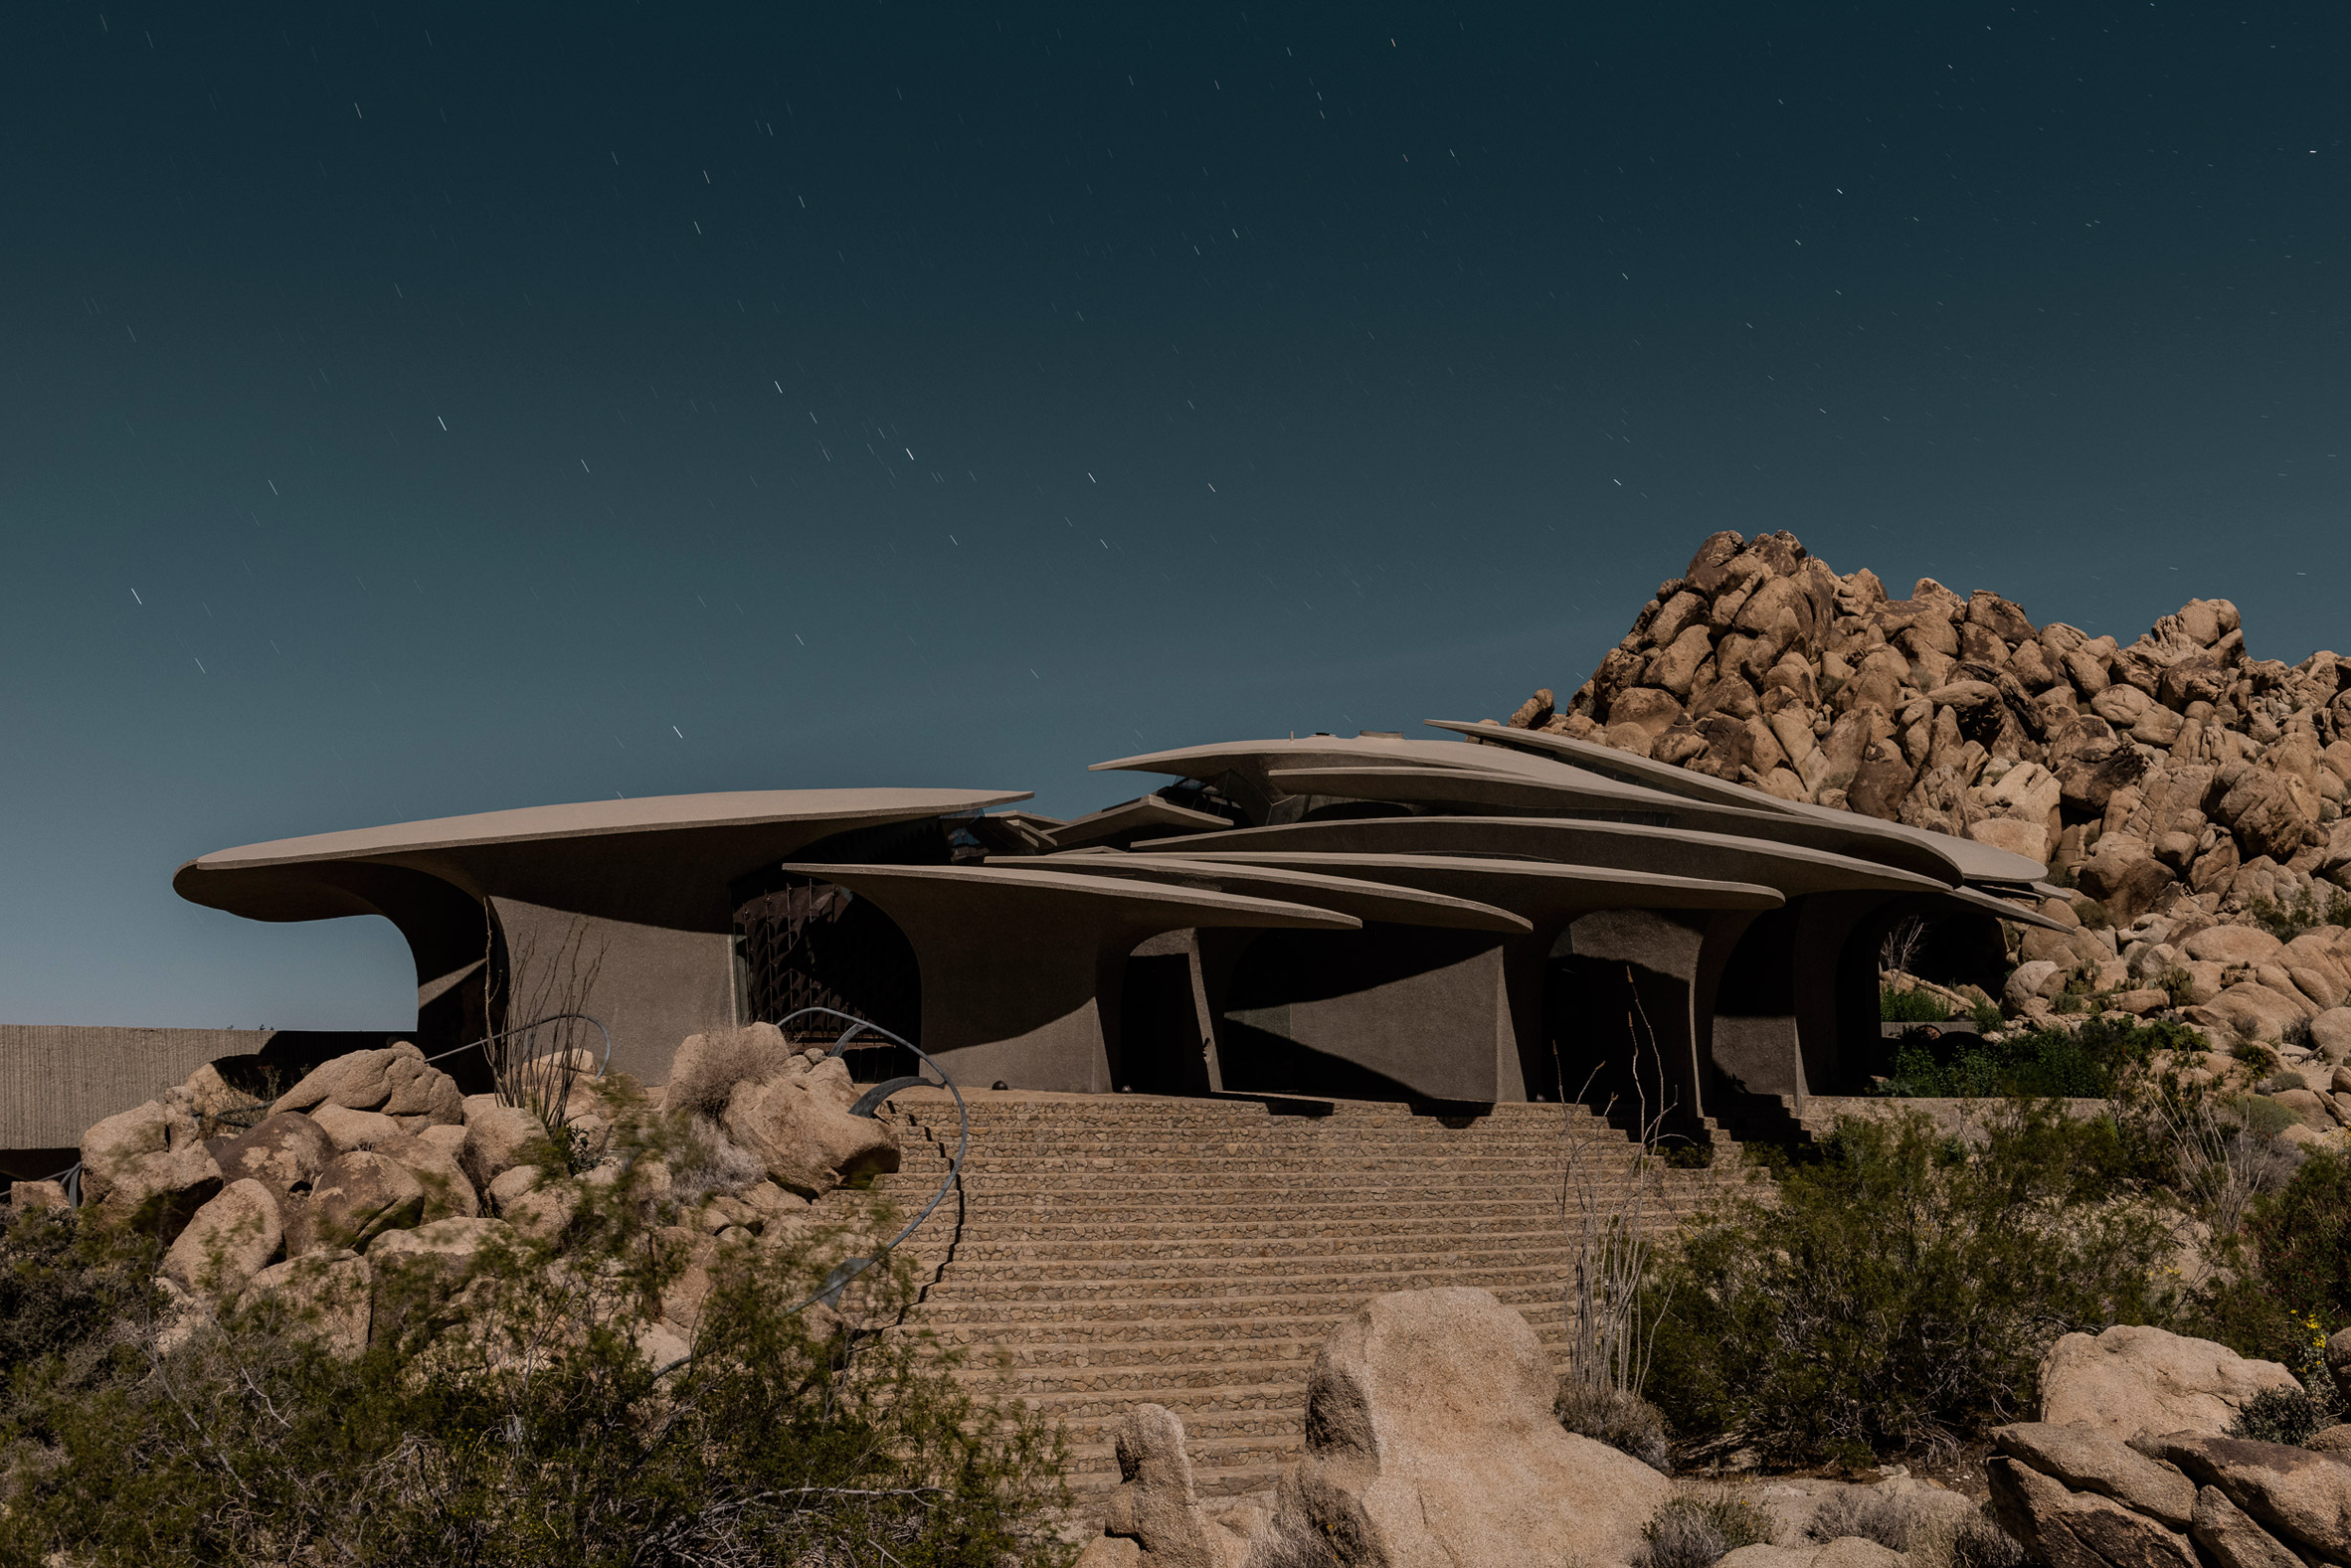 Doolittle House by Kendrick Bangs Kellogg, photographed by Tom Blachford